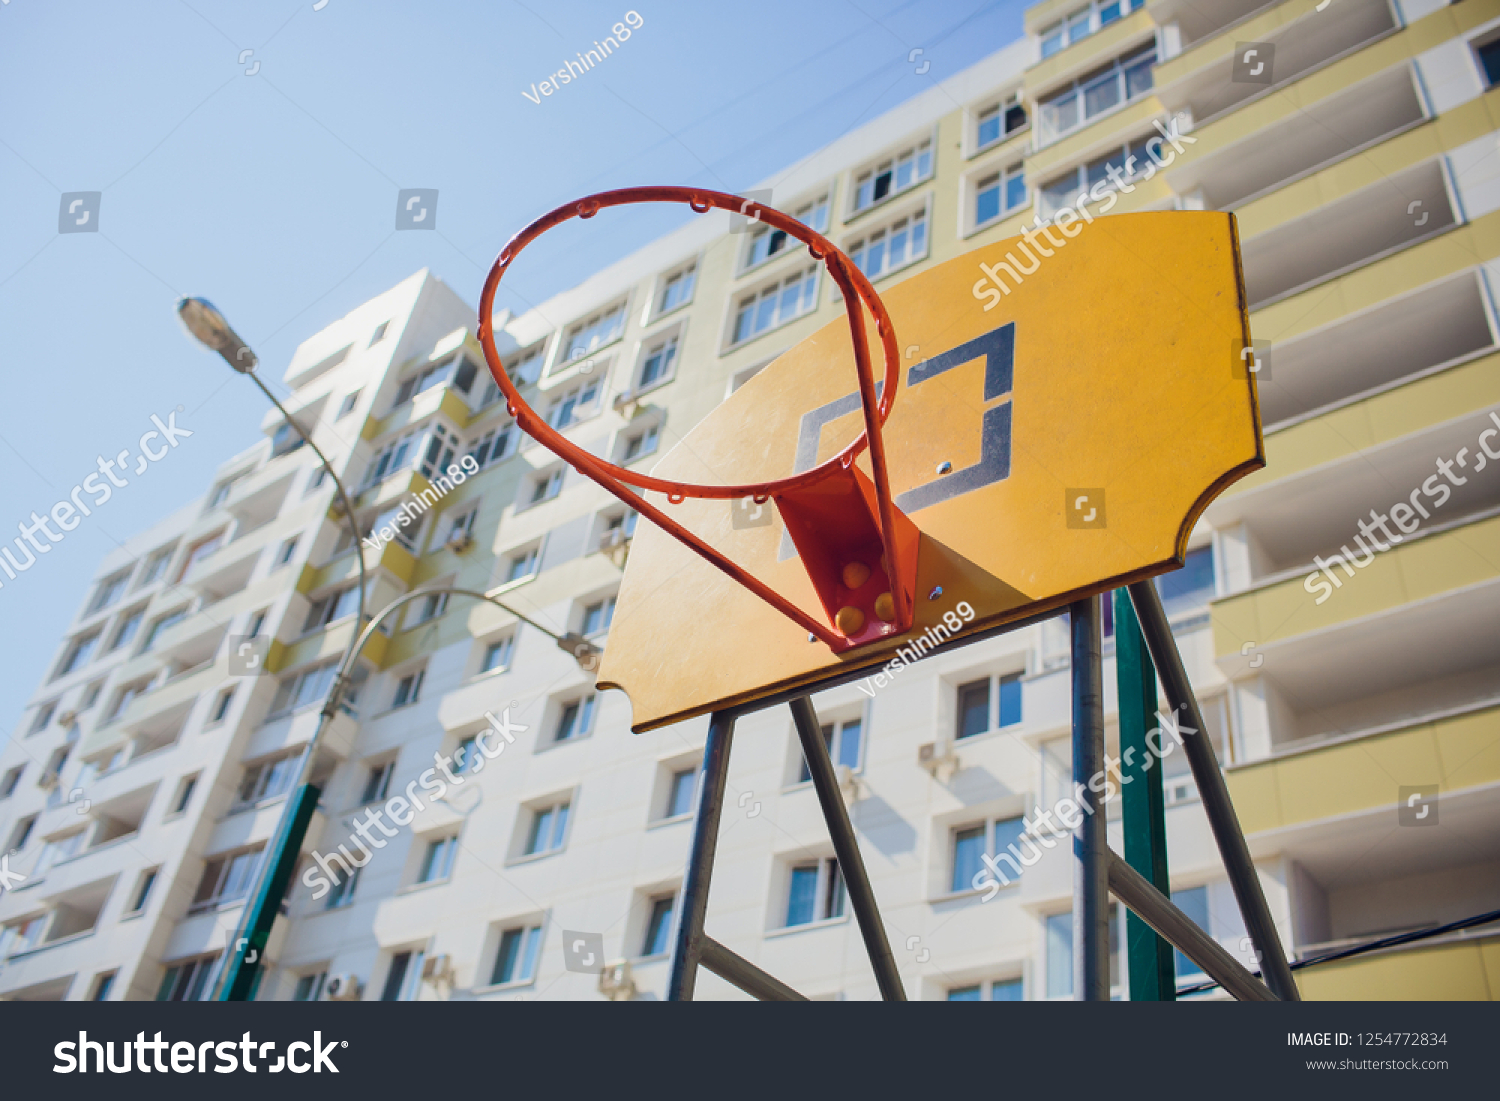 Basketball hoop with backboard in residential district for street basketball game, outdoors sports and recreation. #1254772834